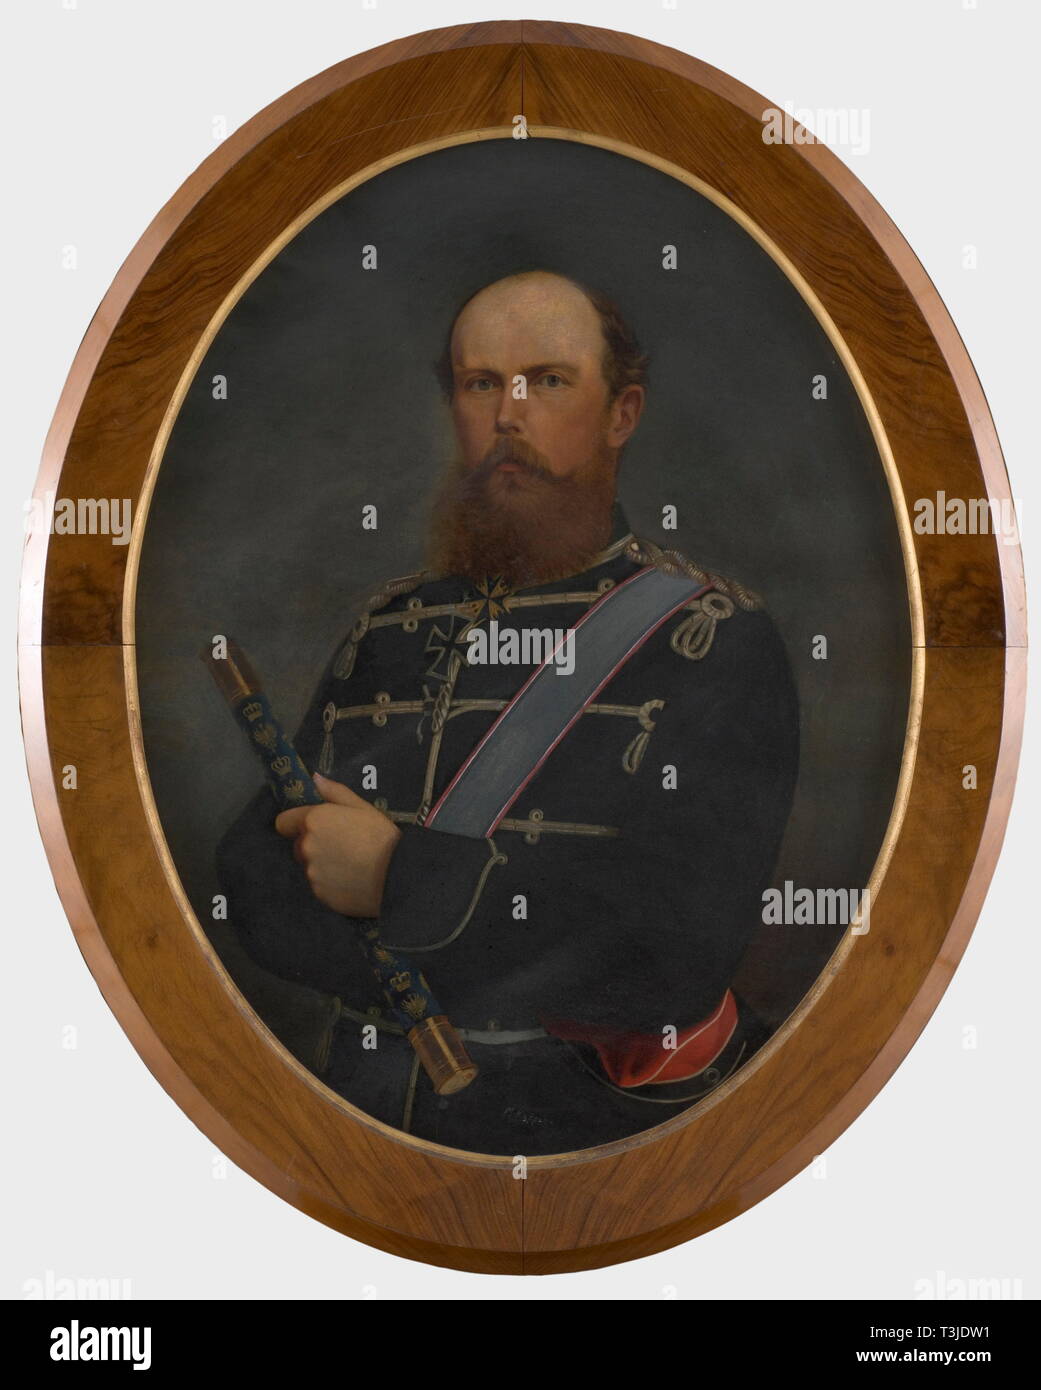 Prince Frederick Charles of Prussia (1828 - 1885), a portrait of the Field Marshal, ca. 1872 Oil on canvas in vertical oval stretcher. Half portrait of the commander in the uniform of the 1st Life Hussar Regiment No. 1 with bandoleer across his chest. Holding in his left hand a marshal's baton, around his neck the Pour le mérite and the Grand Cross of the Iron Cross. On the lower edge the hardly legible signature 'M. Kuppenz(?)'. Oval wood frame with burl veneer. Ca. 114 x 92 cm. Prince Frederick Charles of Prussia, nephew of Kaiser Wilhelm I, wa, Additional-Rights-Clearance-Info-Not-Available Stock Photo